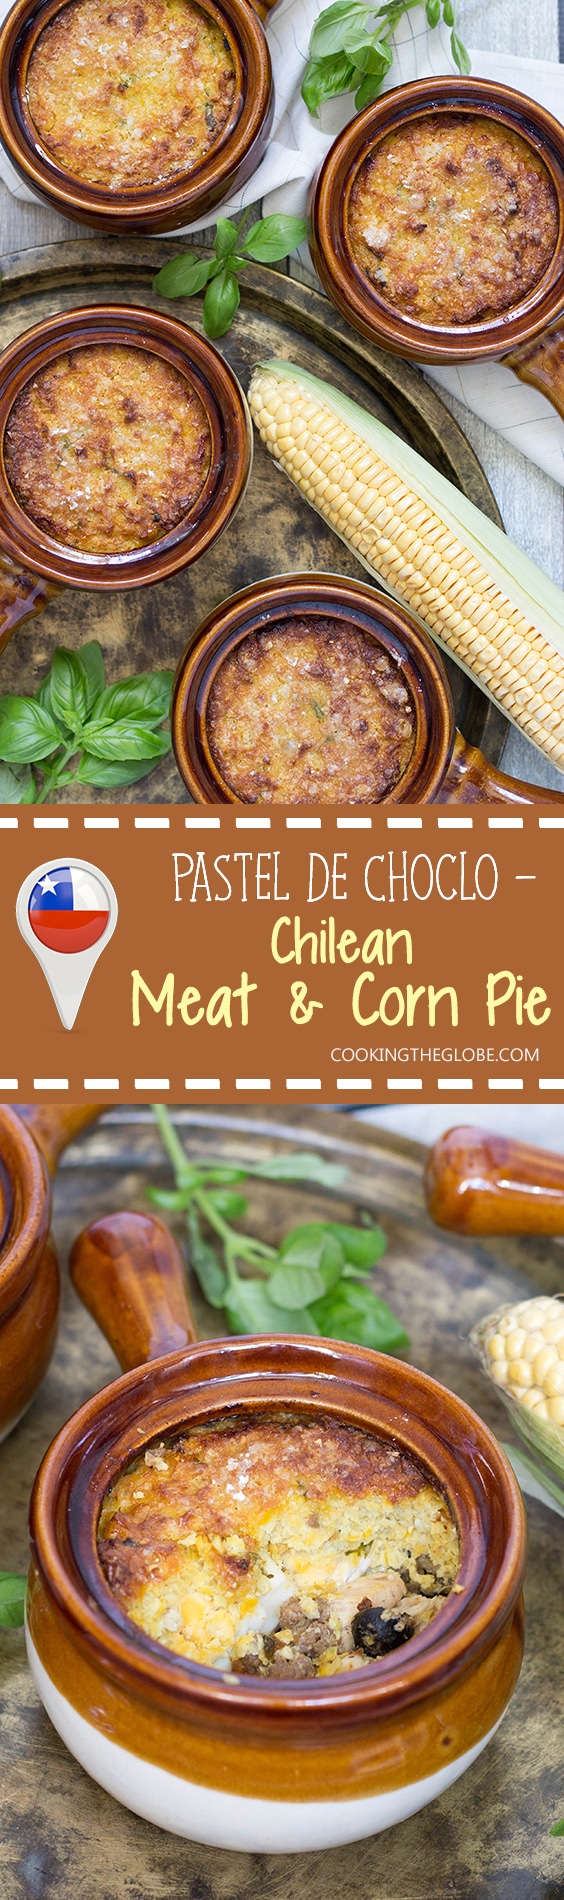 Pastel de Choclo is a famous South American pie, or casserole, stuffed with beef, chicken, eggs, and topped with a delicious corn paste! | cookingtheglobe.com